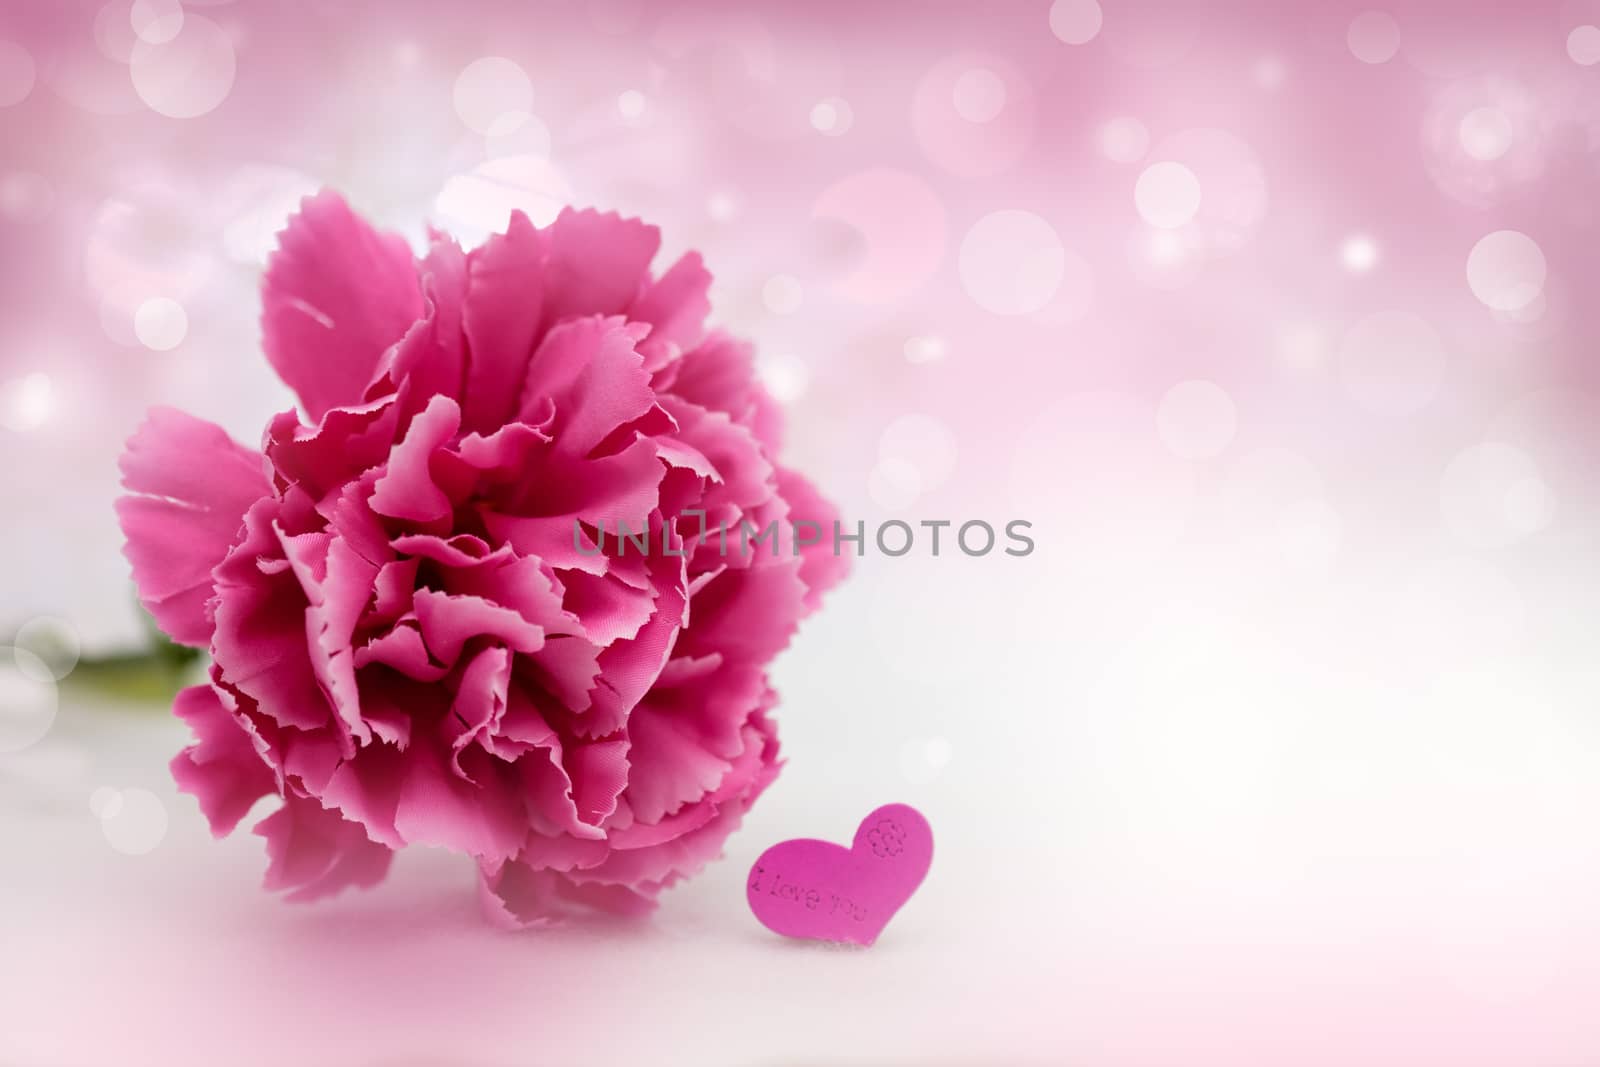 The pink carnation on abstract bokeh background in love concept for valentines day with romantic moment.